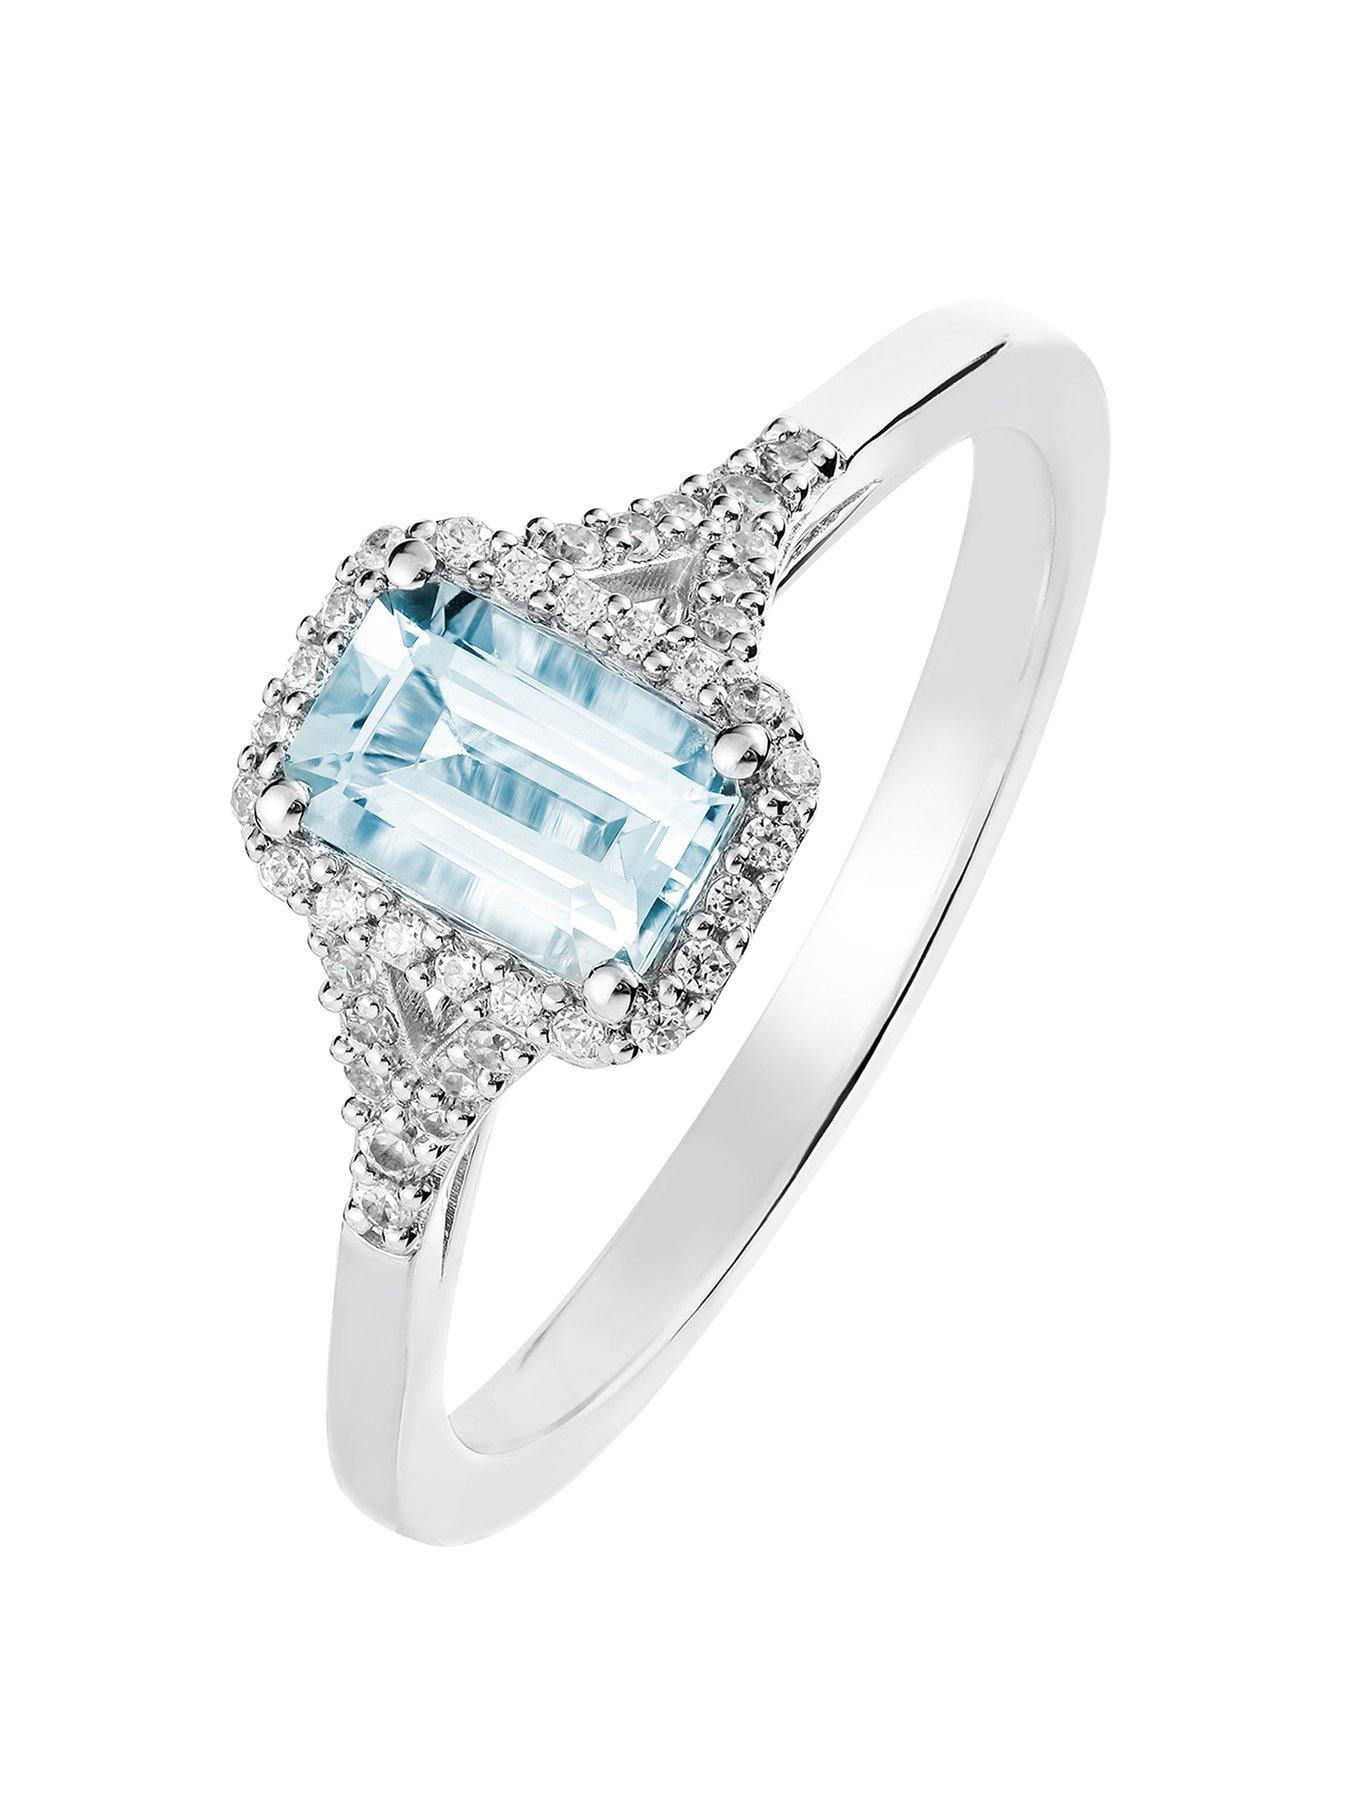 Details about   Aqua Blue Round Diamond Engagement Ring Solid 925 Sterling Silver 